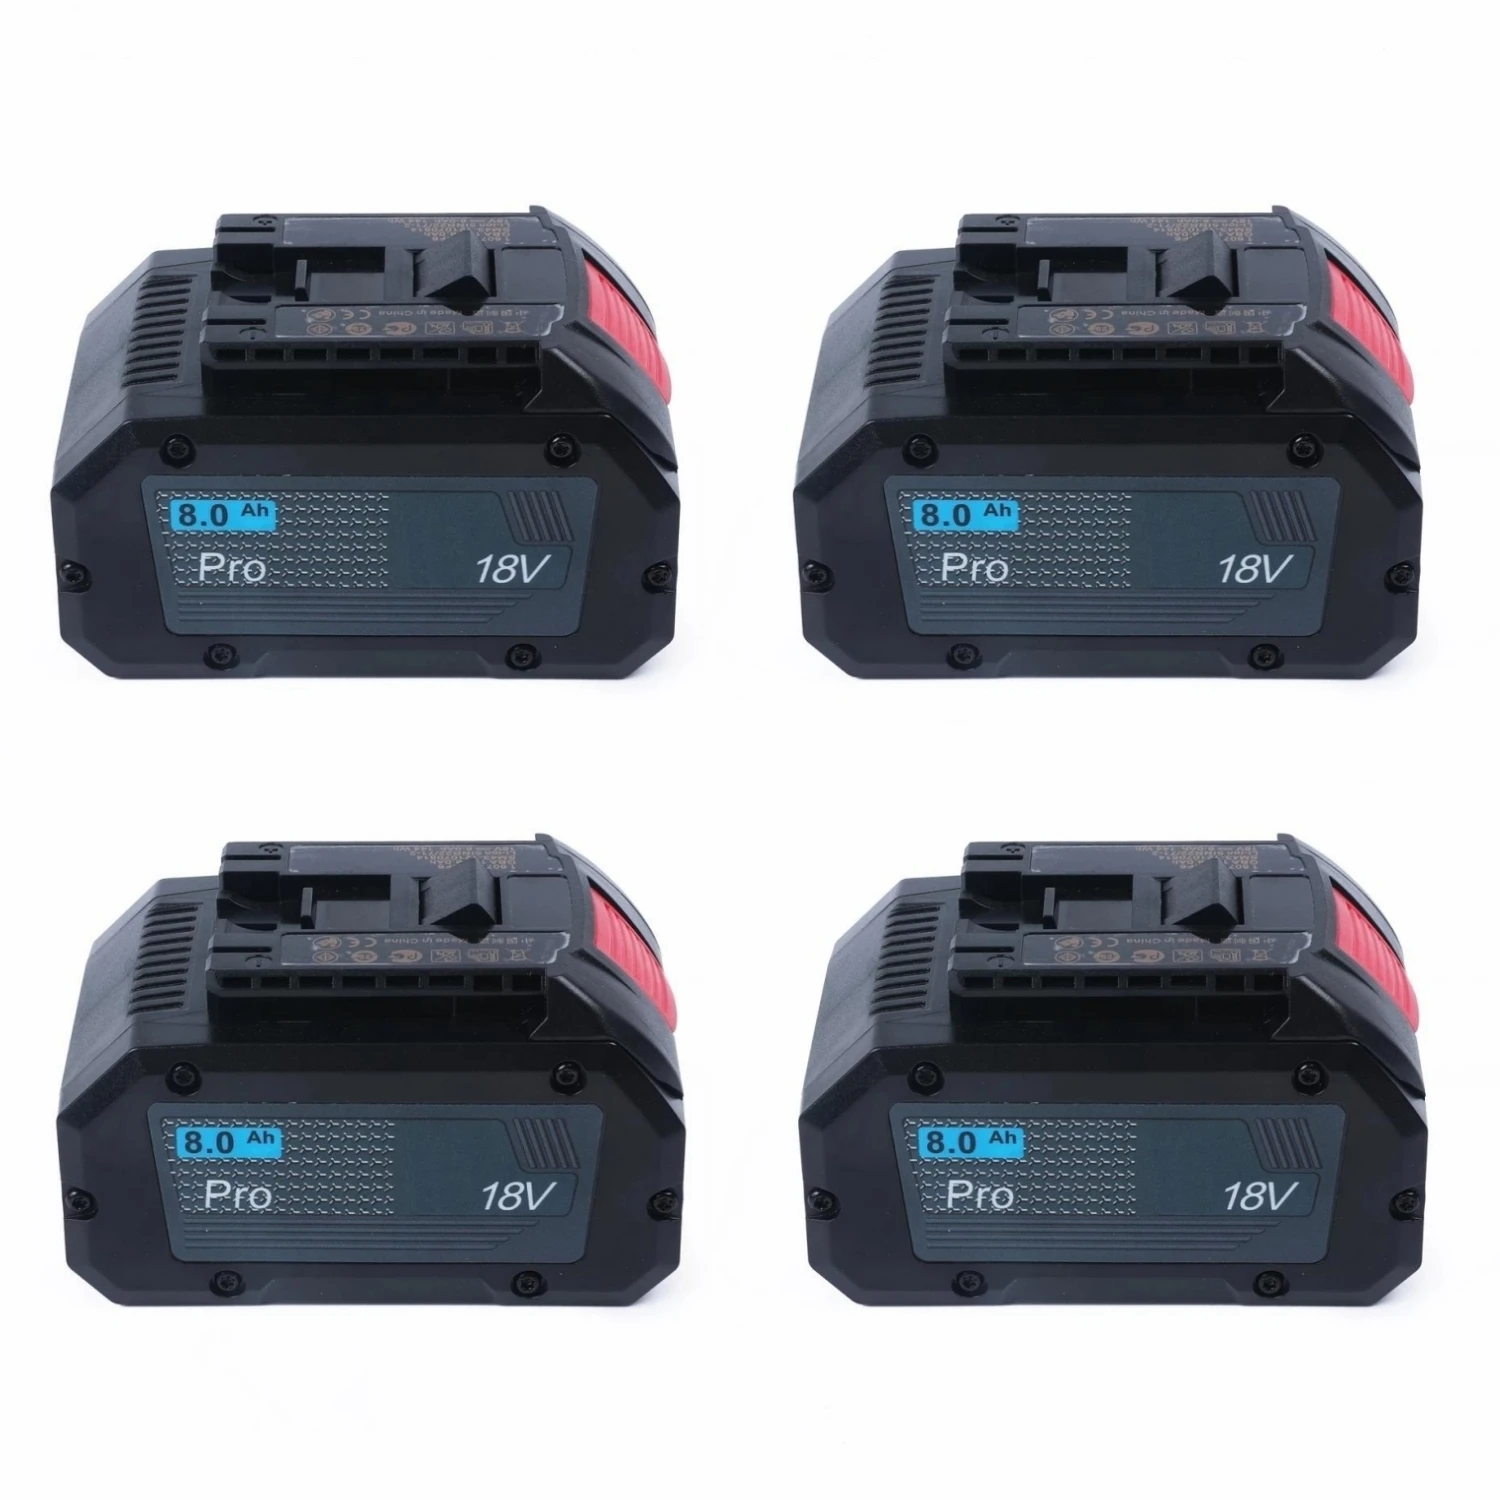 

4Pack New 18V 8.0Ah Lithium-Ion Battery Pack Akku for Bosch 18V MAX Cordless Power Tools Drill Saw Hammer for GBA18V80 GBA18V120